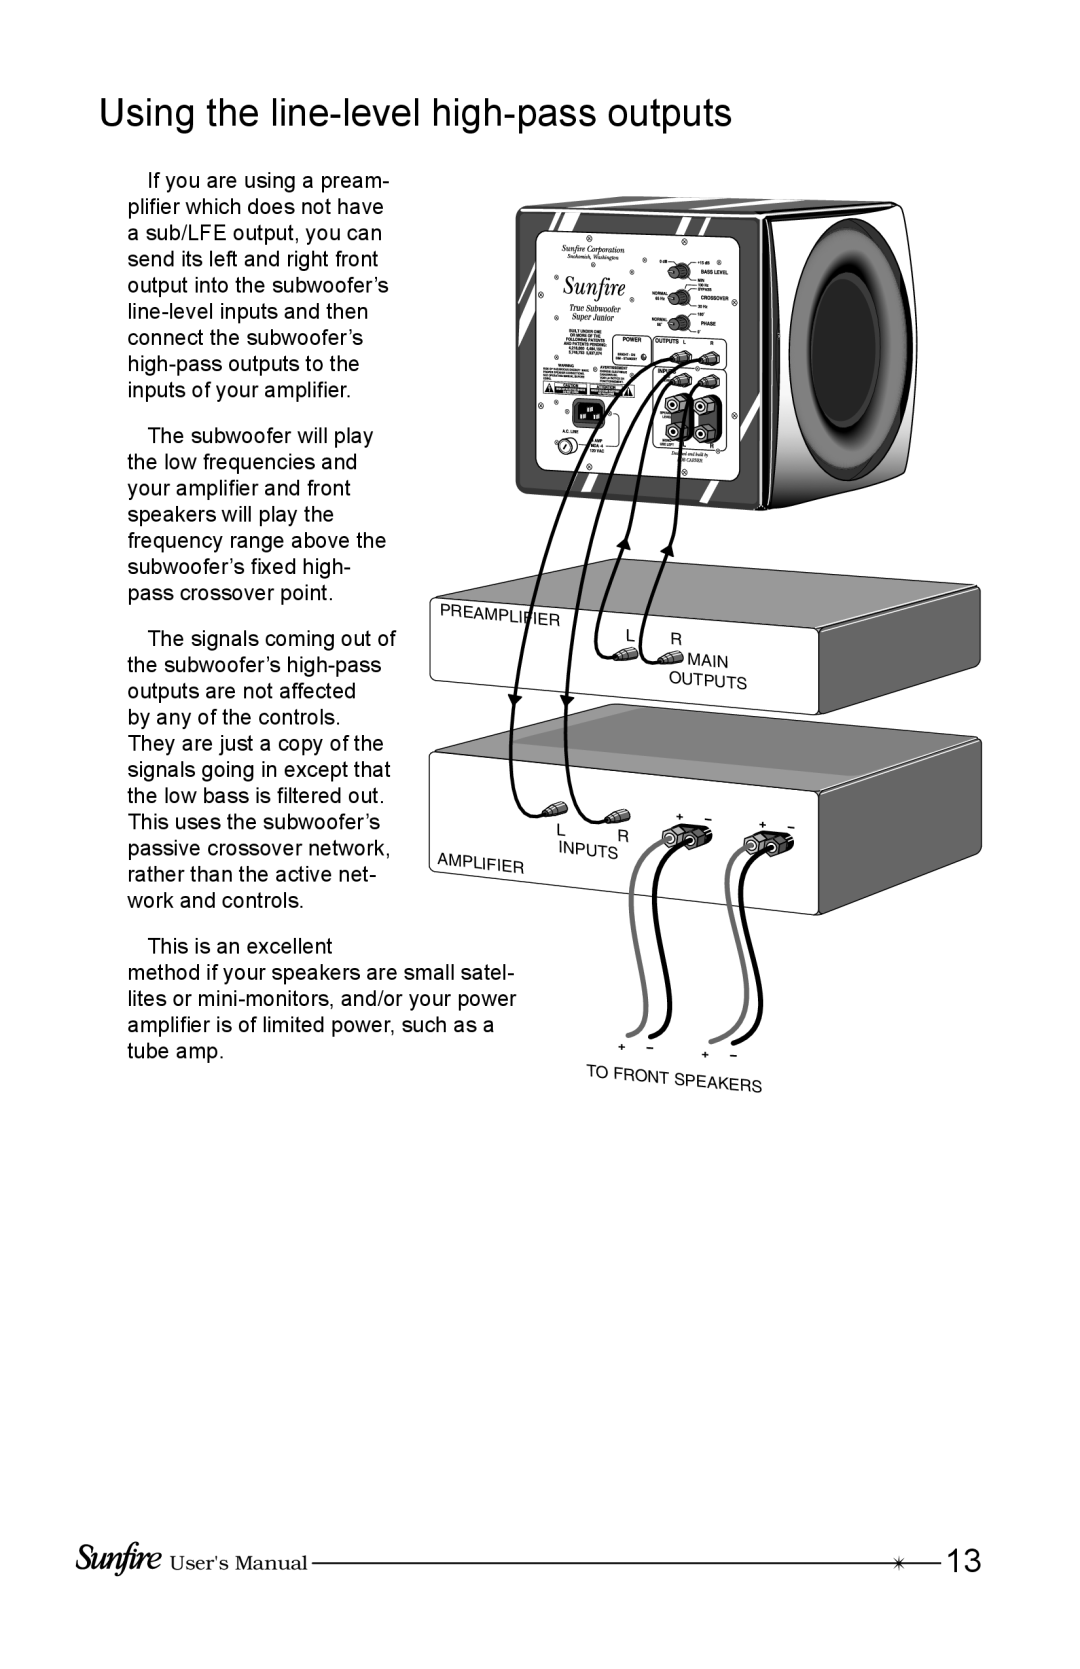 Sunfire Home Theater System manual Using the line-level high-passoutputs 